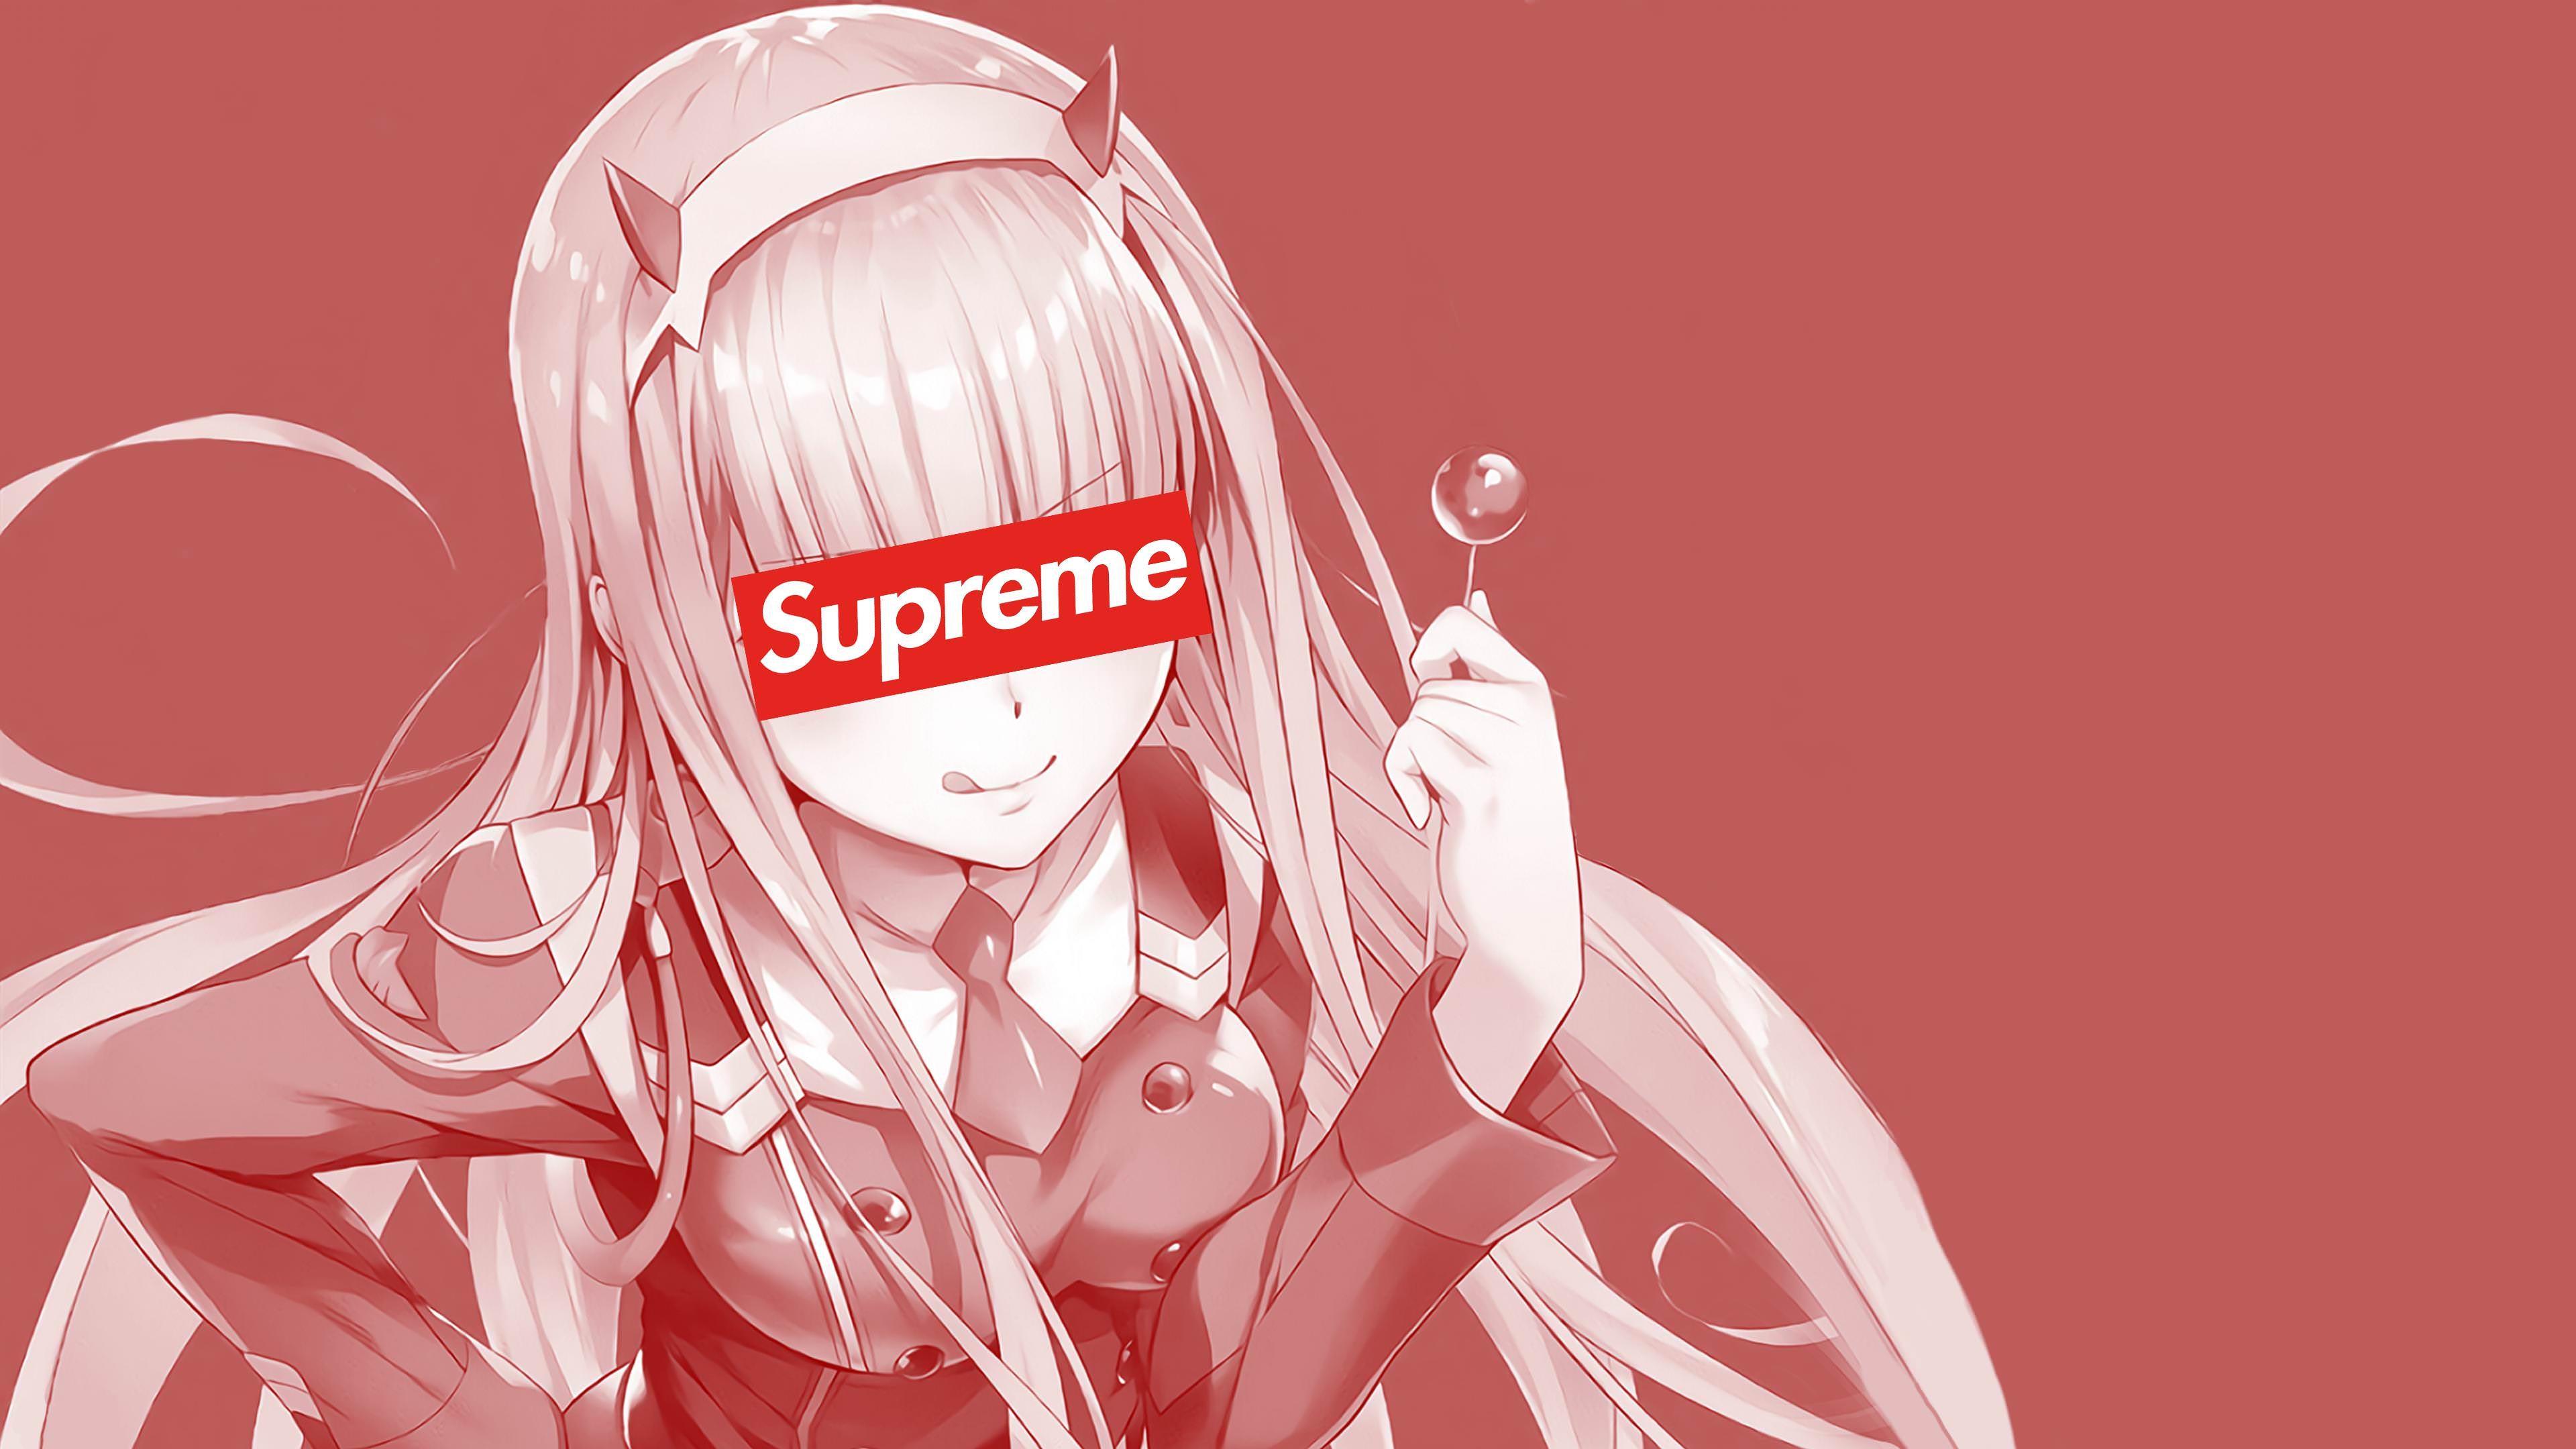 supreme 4K wallpapers for your desktop or mobile screen free and